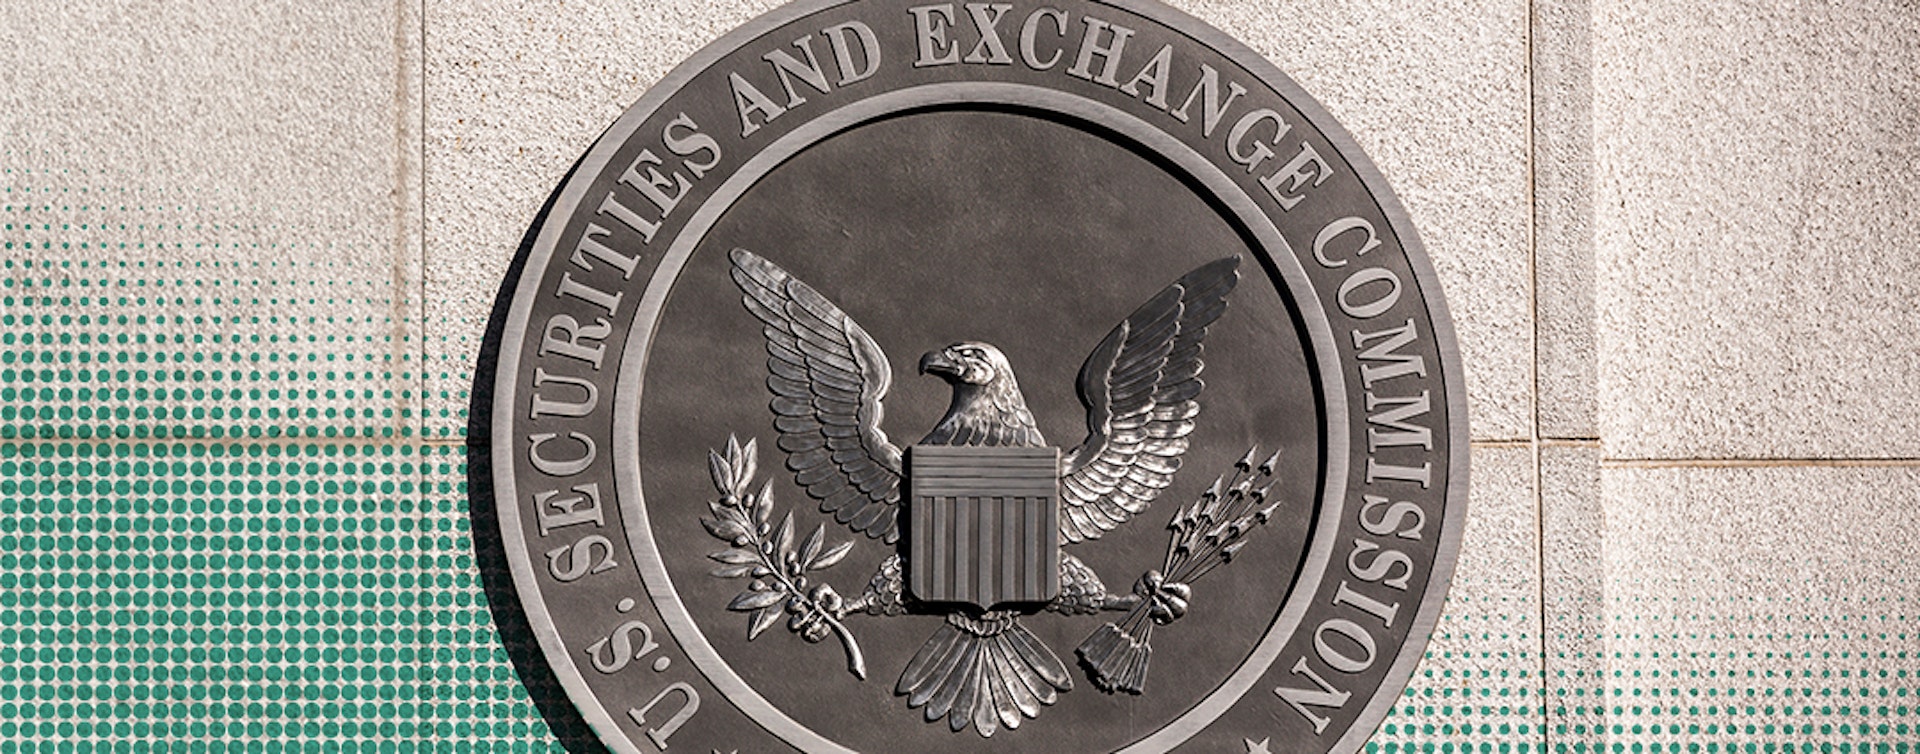 The SEC's New Cyber Rules: Considerations for Compliance